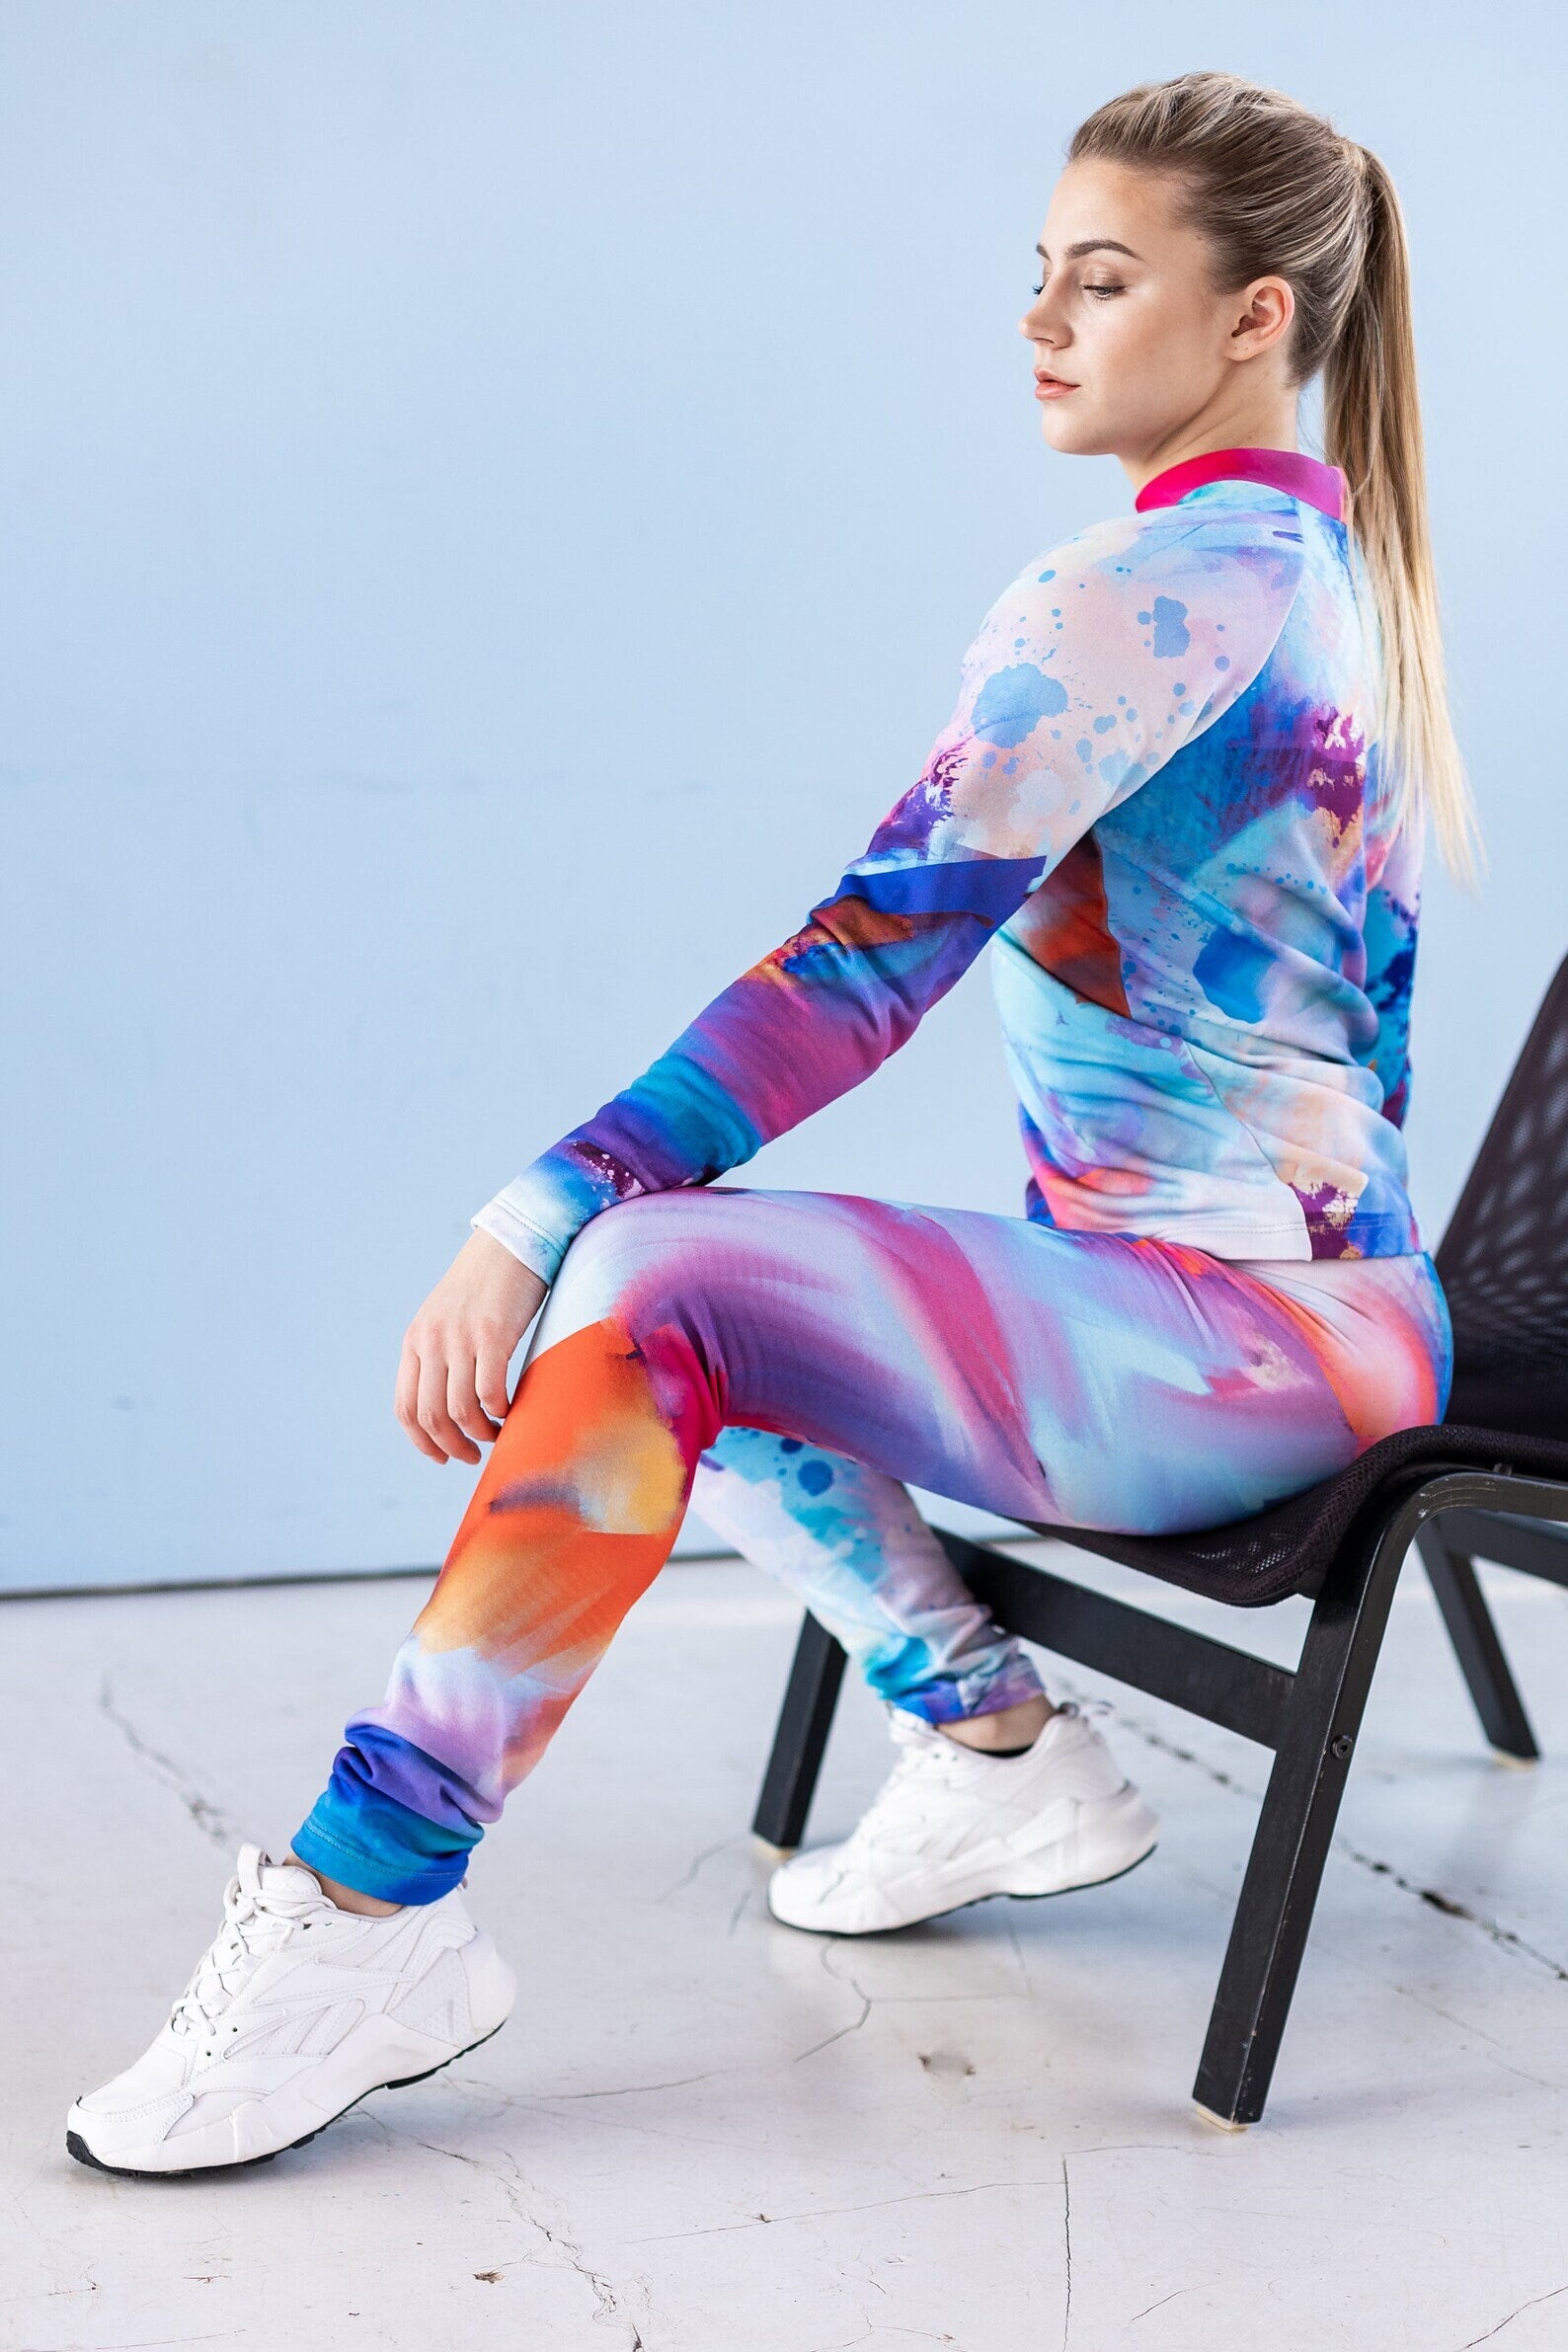 SET: Women's Thermowear, Leggings, Abstract Light Top, Winter Underwear, Thermal Protective, Clothing, Sport underwear, Winter Clothes